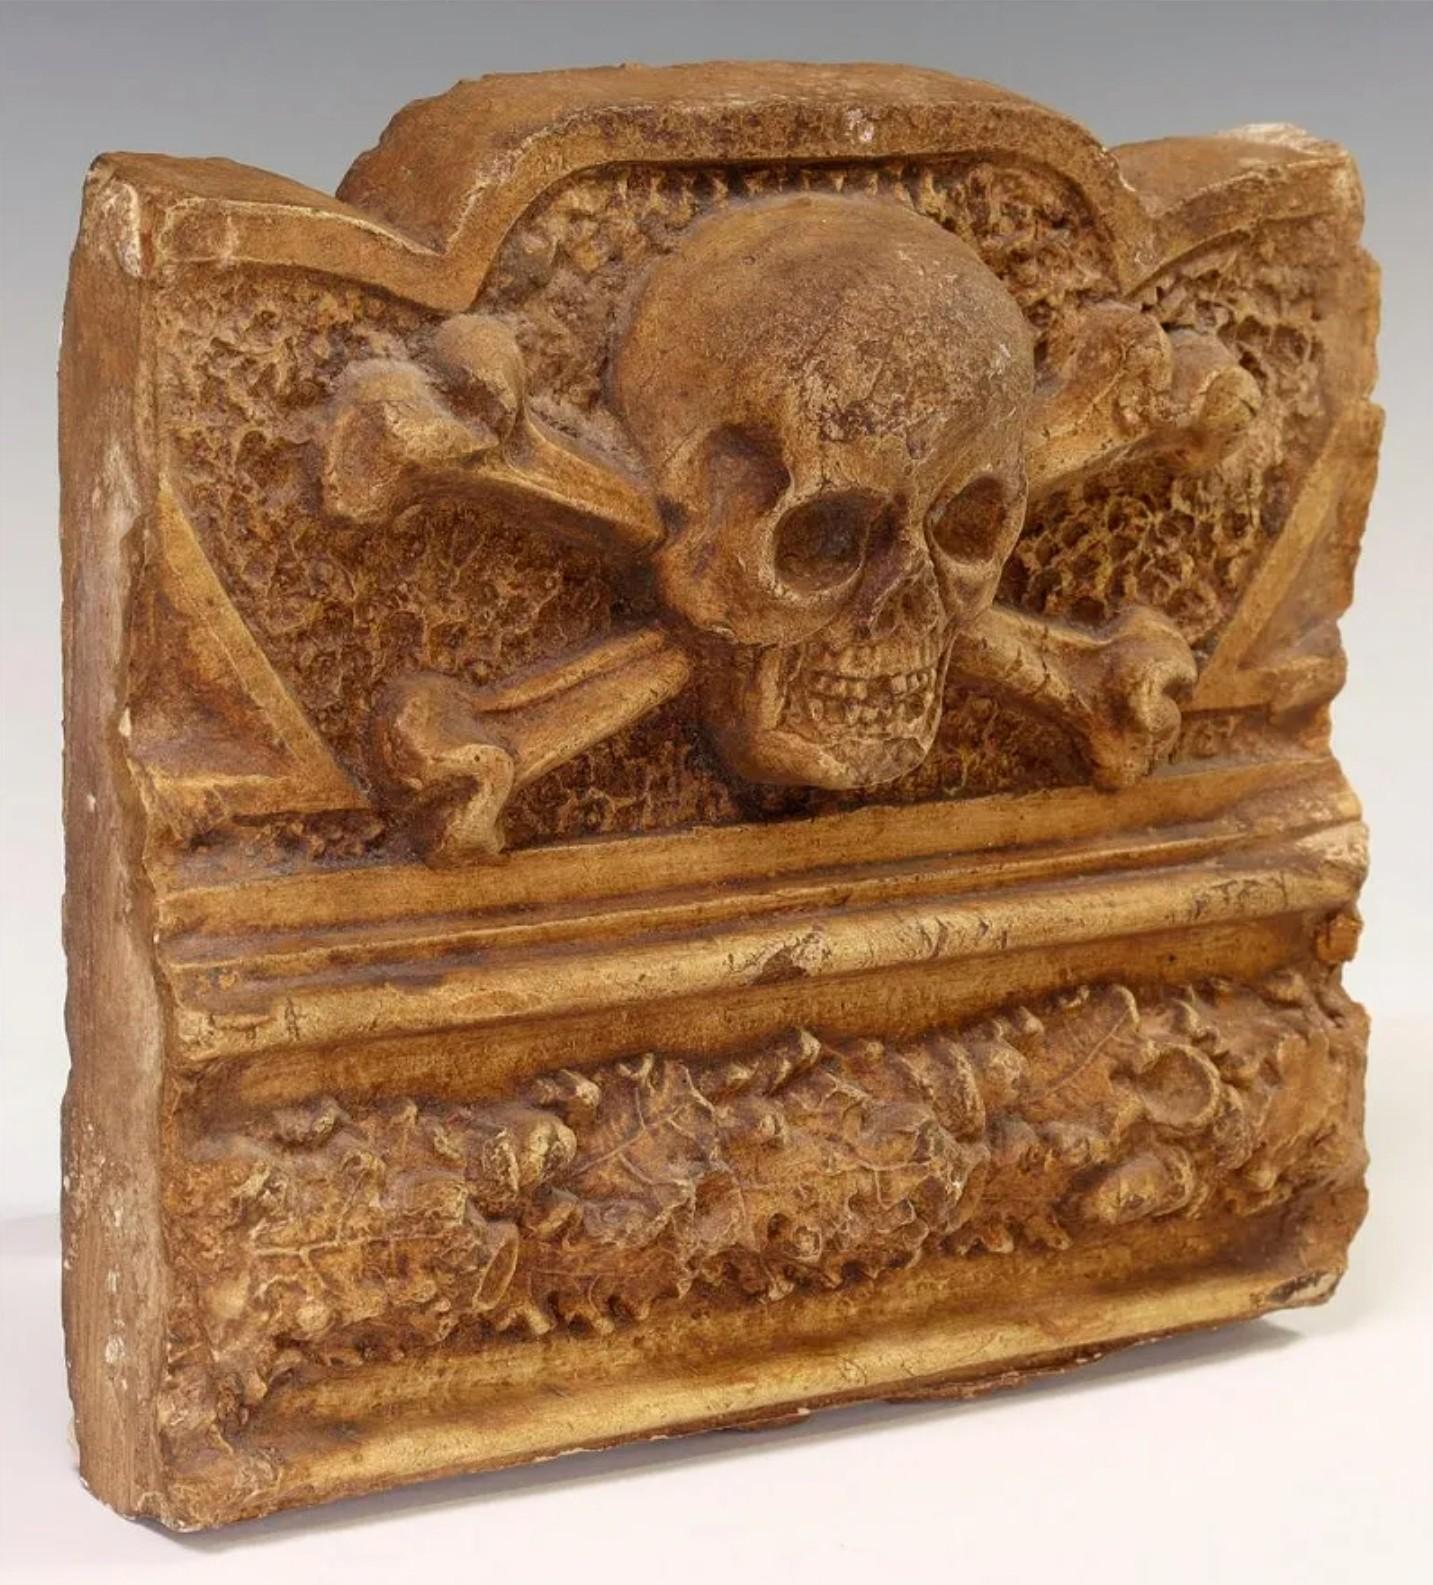 Antique Skull and Crossbones cast architectural salvaged decorative building element, most likely frieze panel fragment. The sculptural Italian Renaissance Memento Mori style architectural ornament crafted of high-quality terracotta, depicting skull